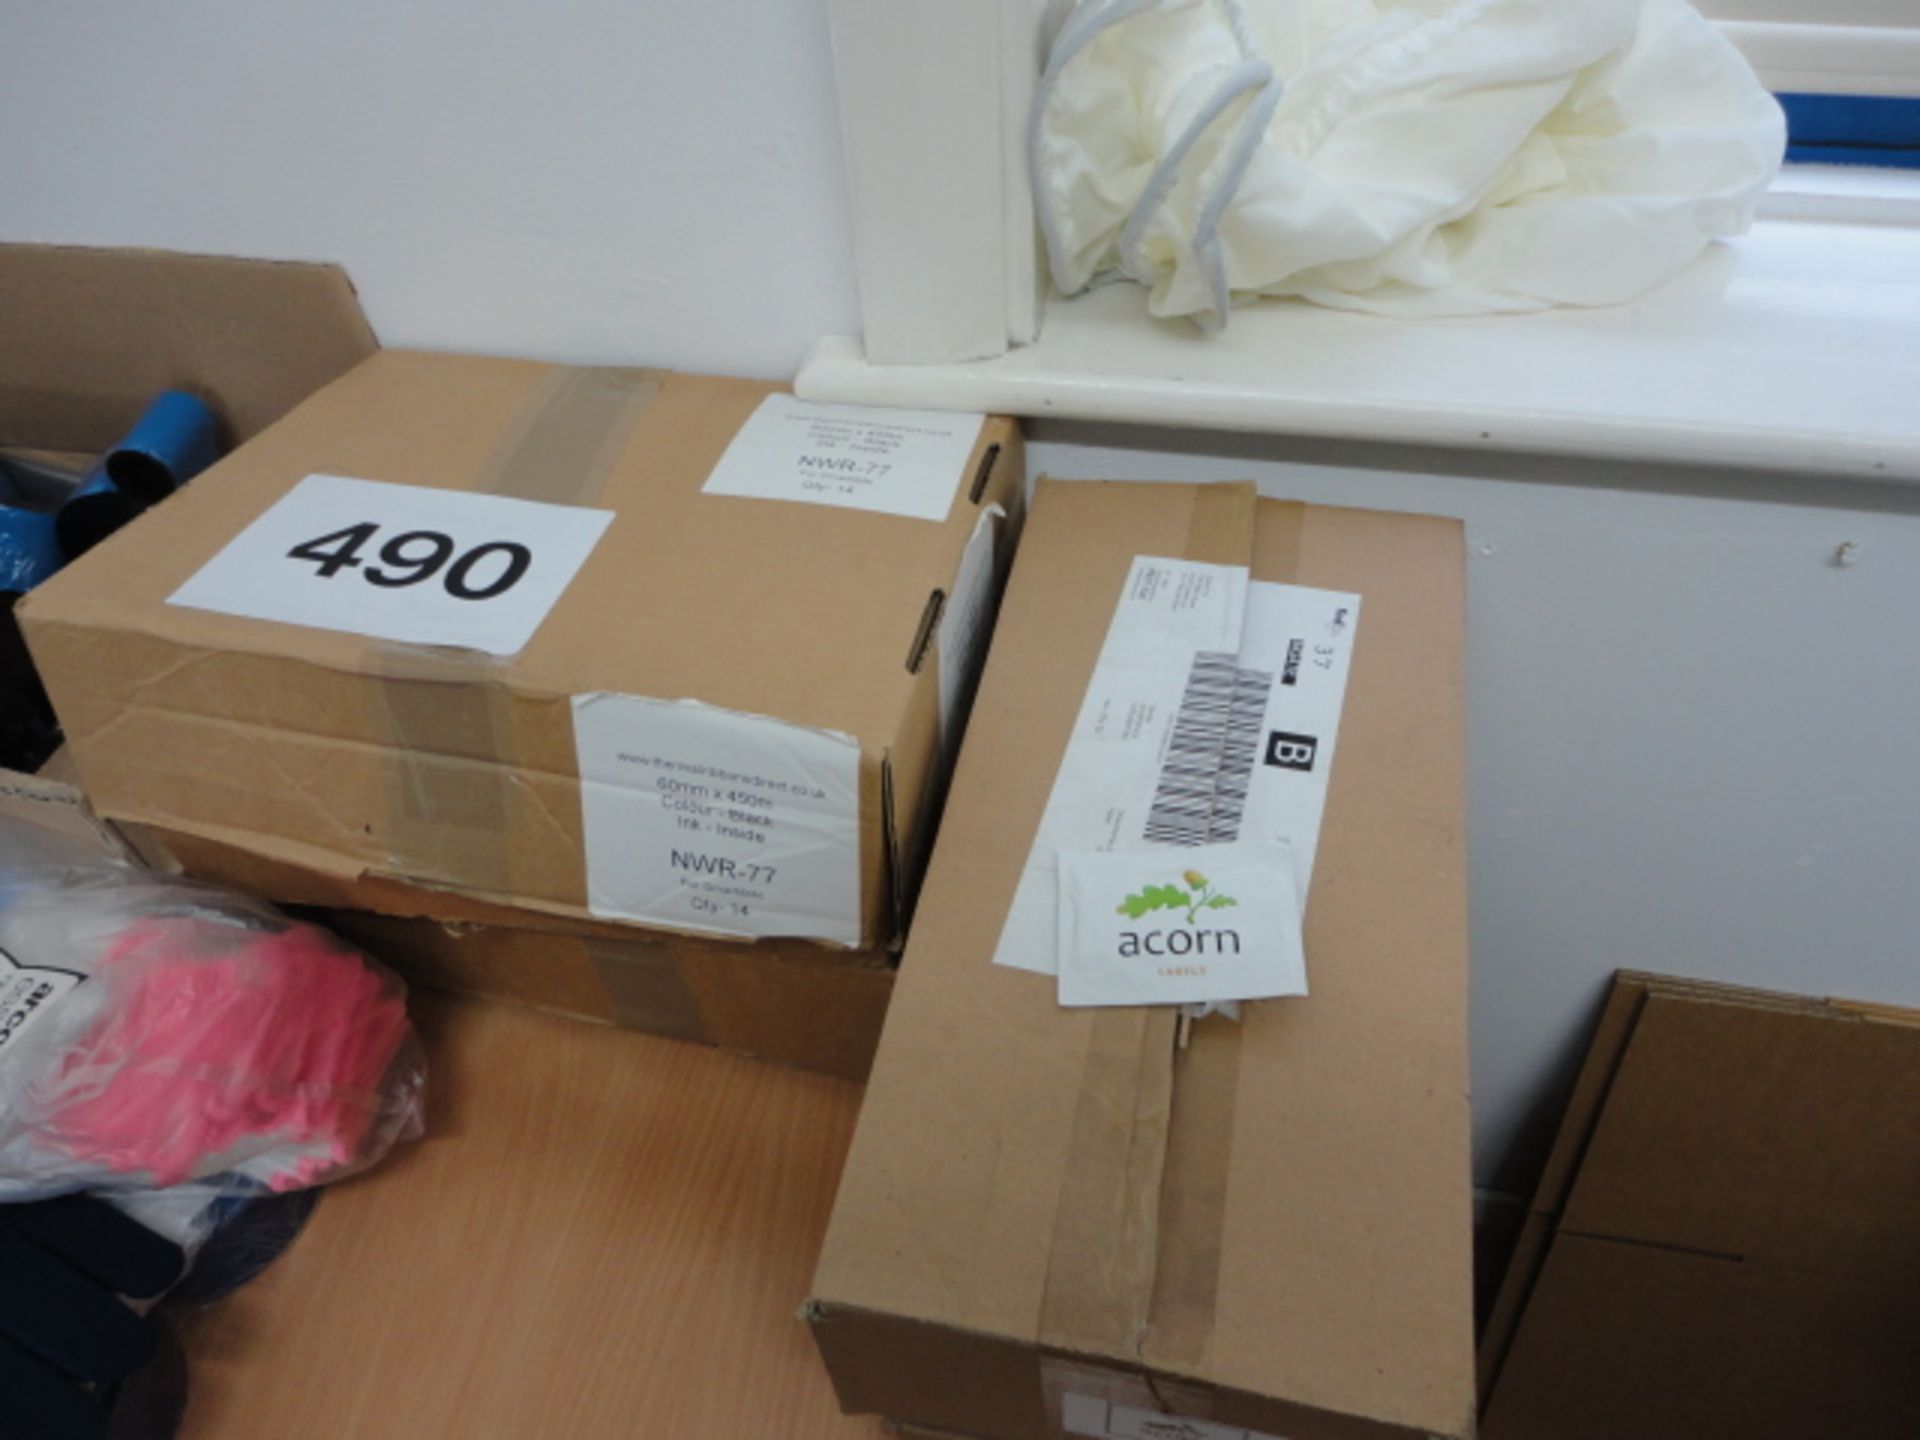 2 x Box of print head wipes, Thermal printer ribbons x 3 boxes 60x50 model NWR-77 blackLIFT OUT £5 - Image 2 of 2